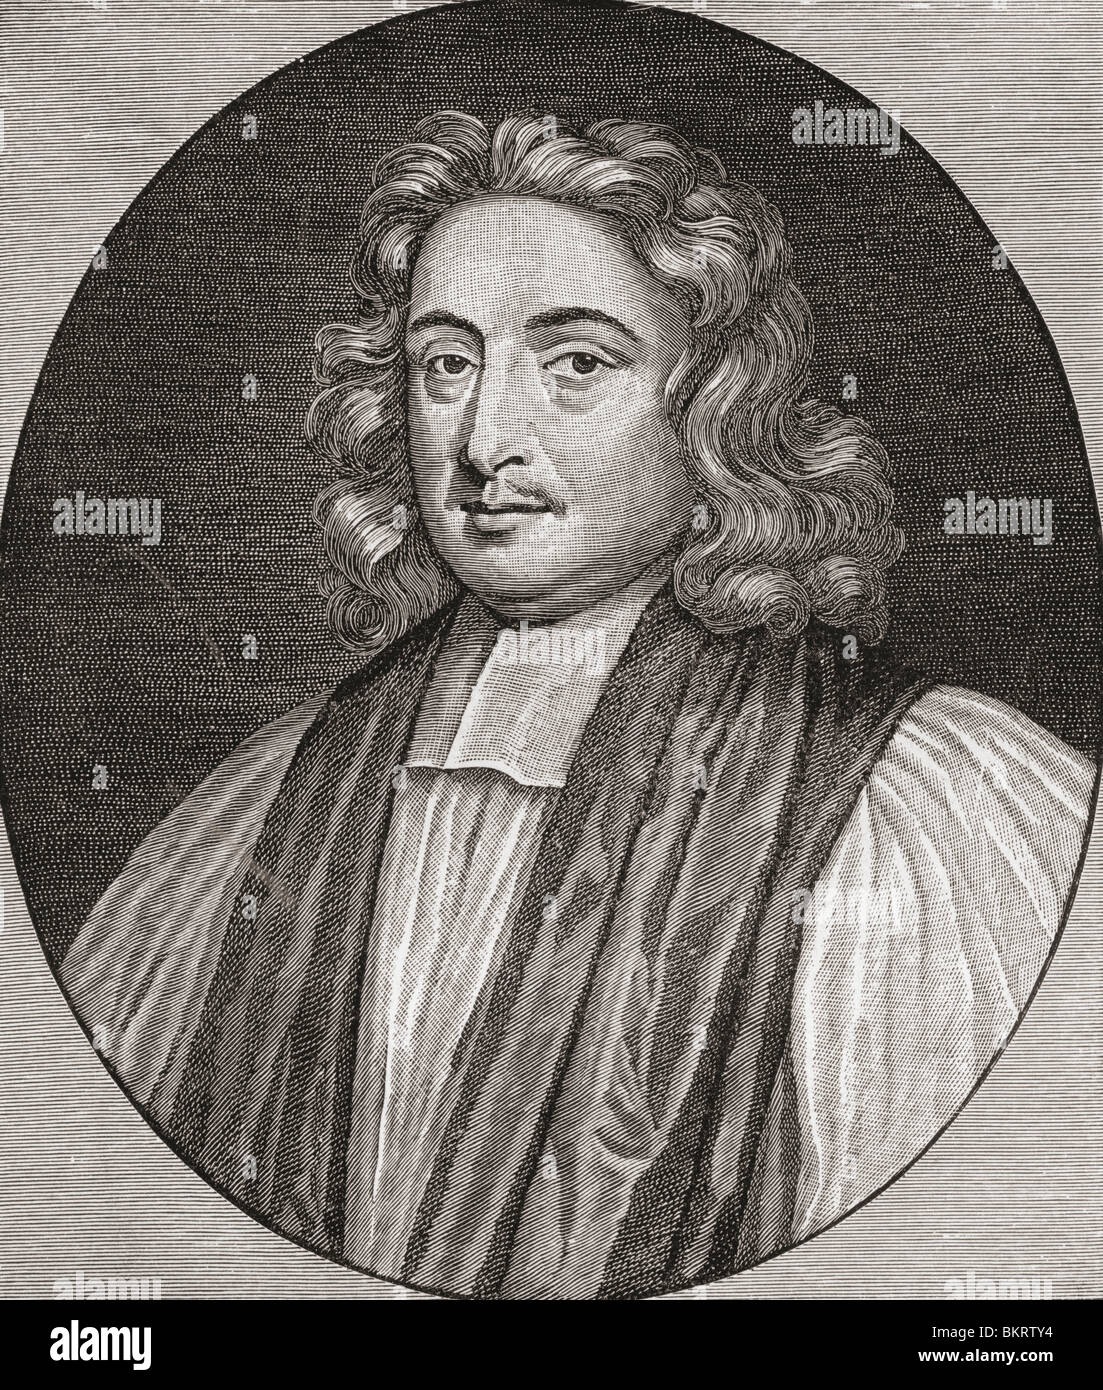 John Wilkins, 1614 to 1672. English clergyman, natural philosopher and author. Stock Photo